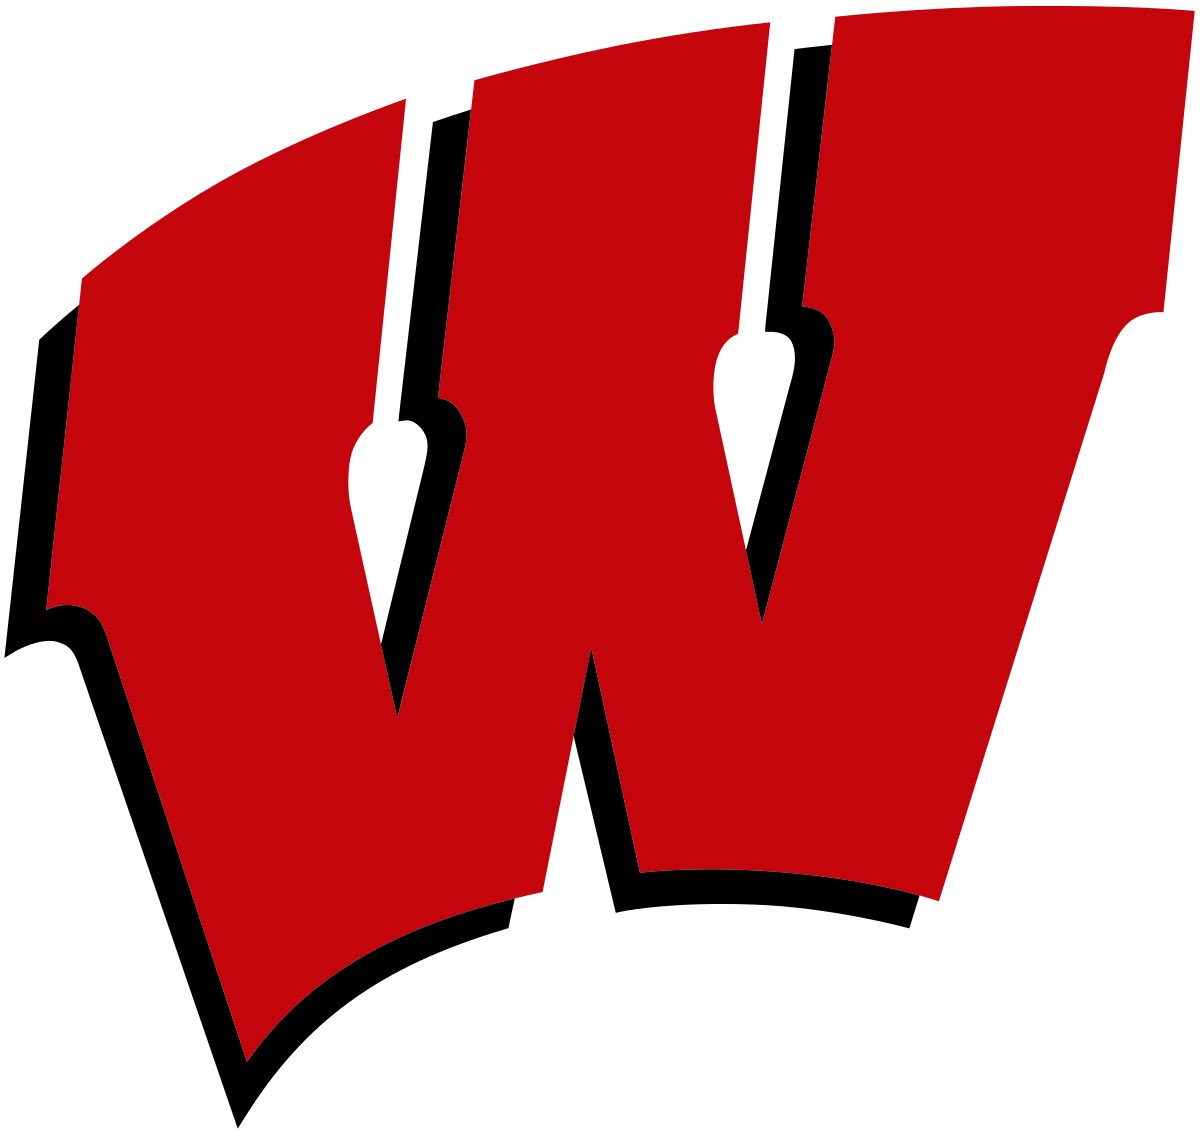 After a great conversation with @CoachGuiton I am blessed to receive an offer from University of Winsconsin! @BadgerFootball @WisFBRecruiting @patricketherton @AllenTrieu @EDGYTIM